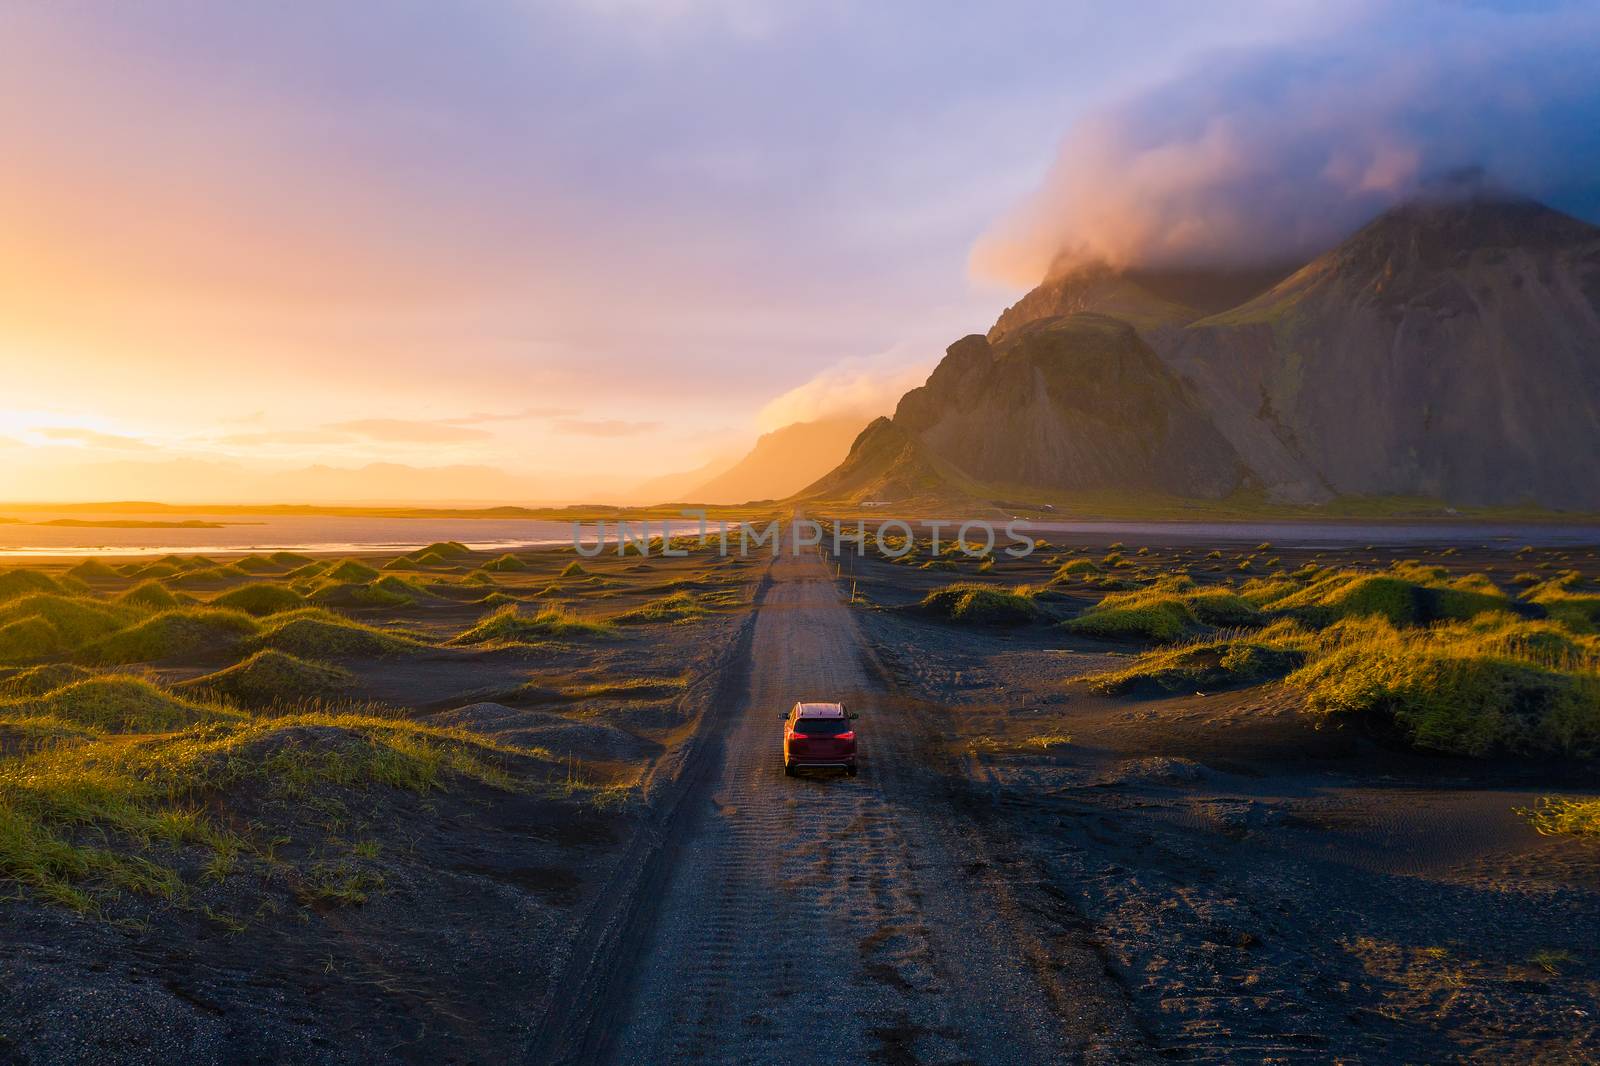 Gravel road at sunset with Vestrahorn mountain and a car driving, Iceland by nickfox